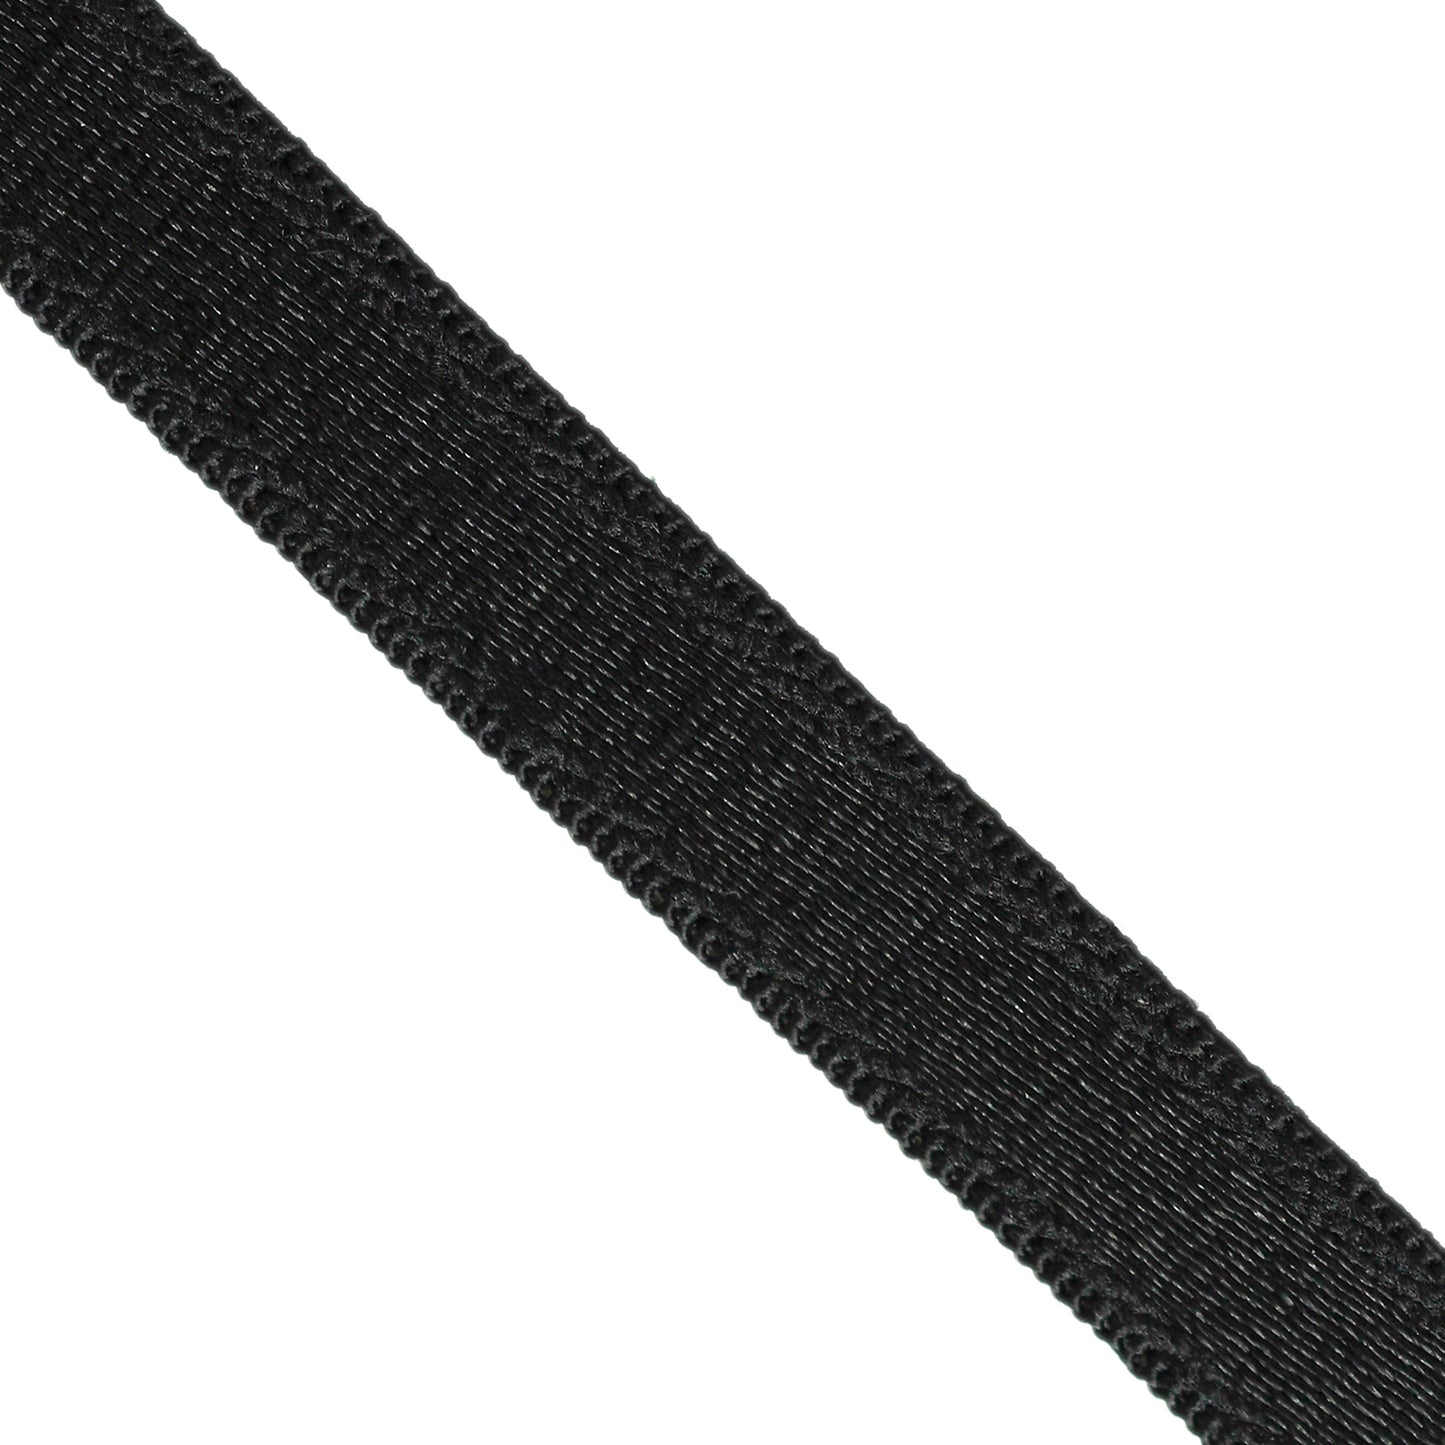 7MM SHOULDER STRAPPING 100M